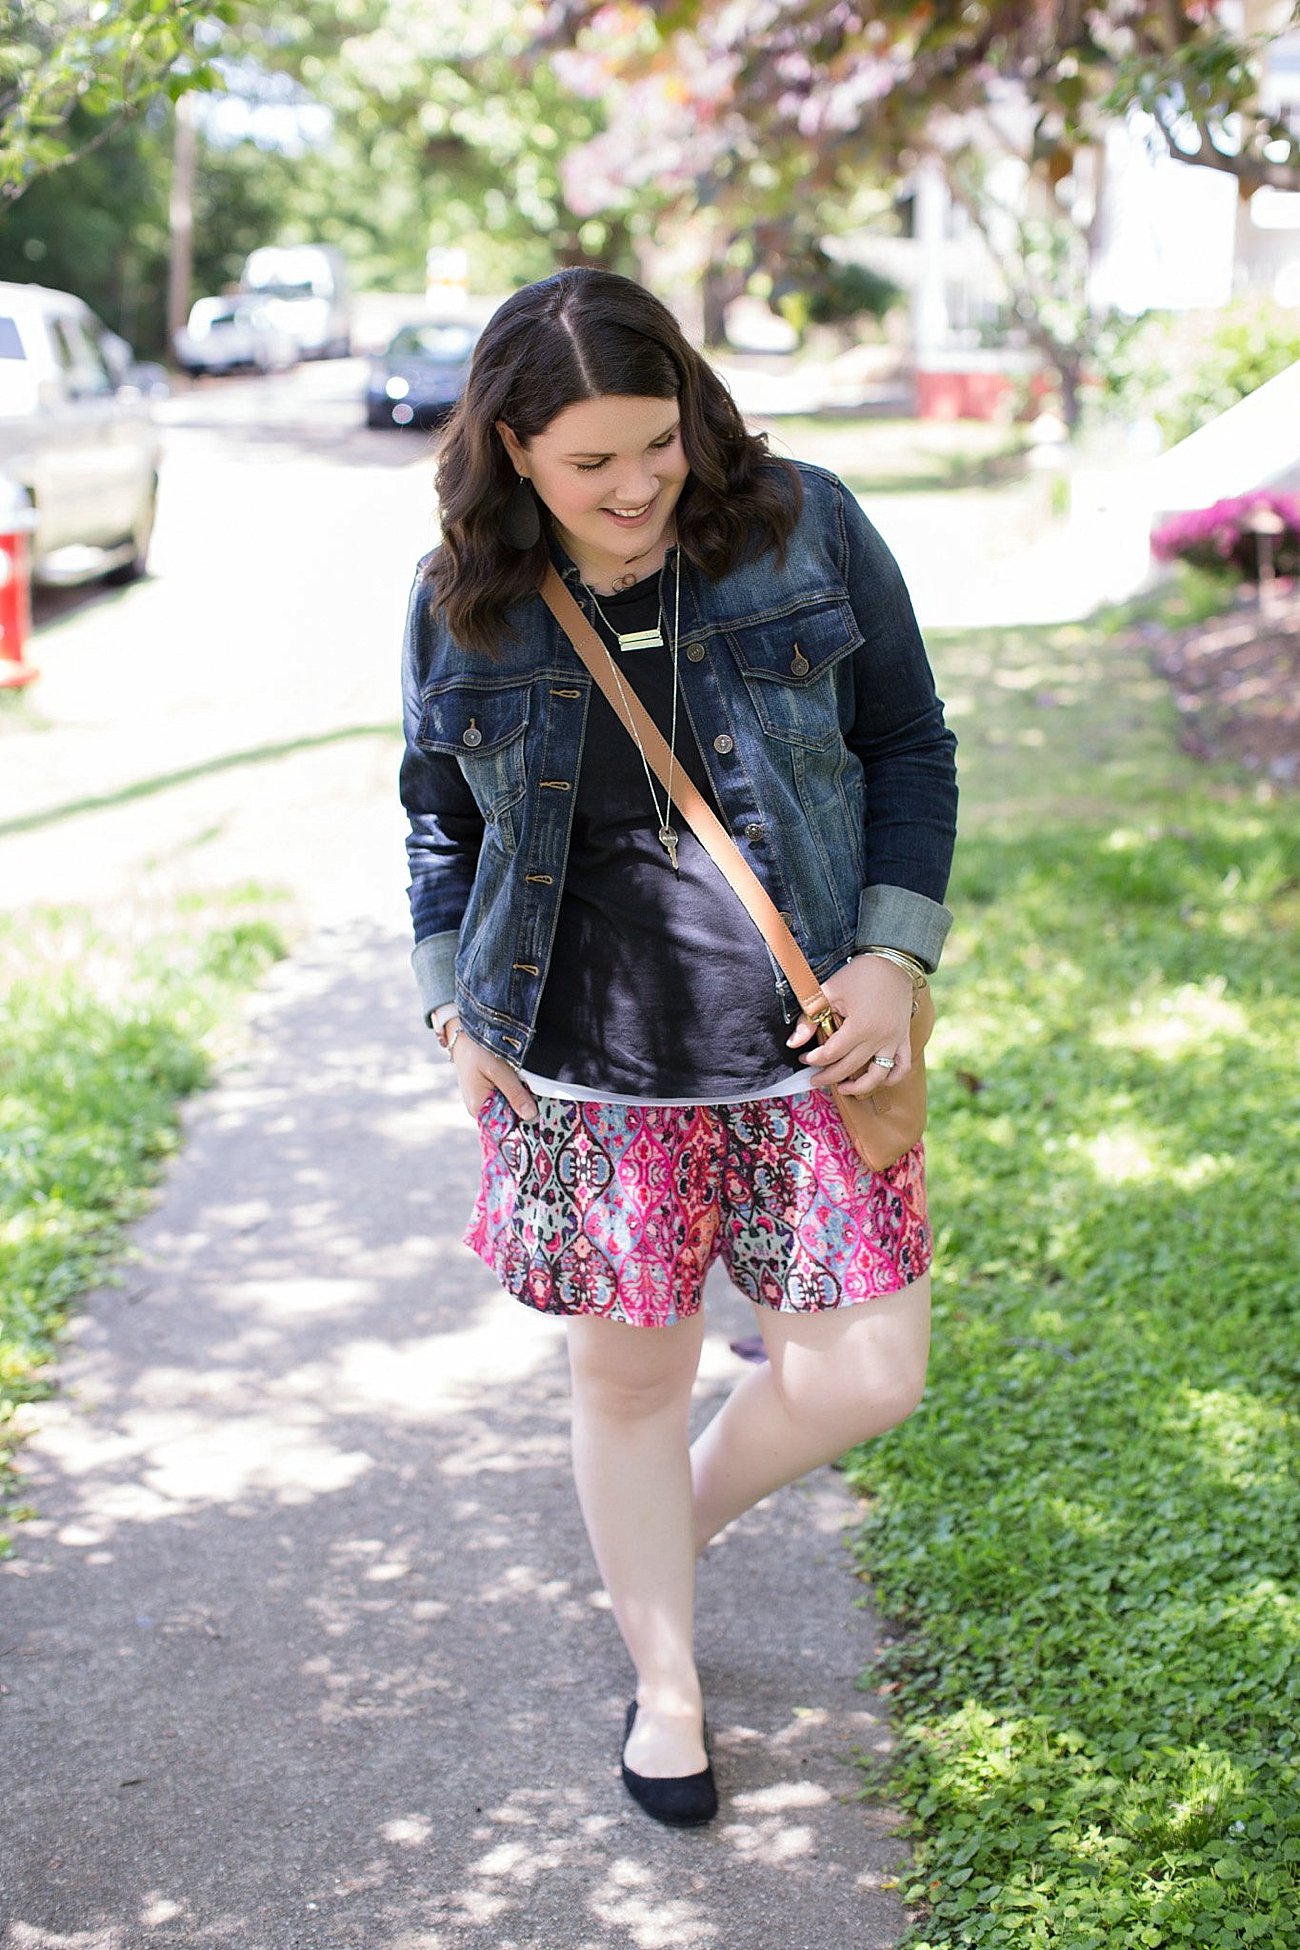 Threads 4 Thought Mona Skort, Stitch Fix Just USA Denim Jacket, Sudara Goods Globetrotter Tee, Sseko Designs Foldover Crossbody Clutch, The Root Collective shoes | Ethical Fashion & Style Blogger (1)